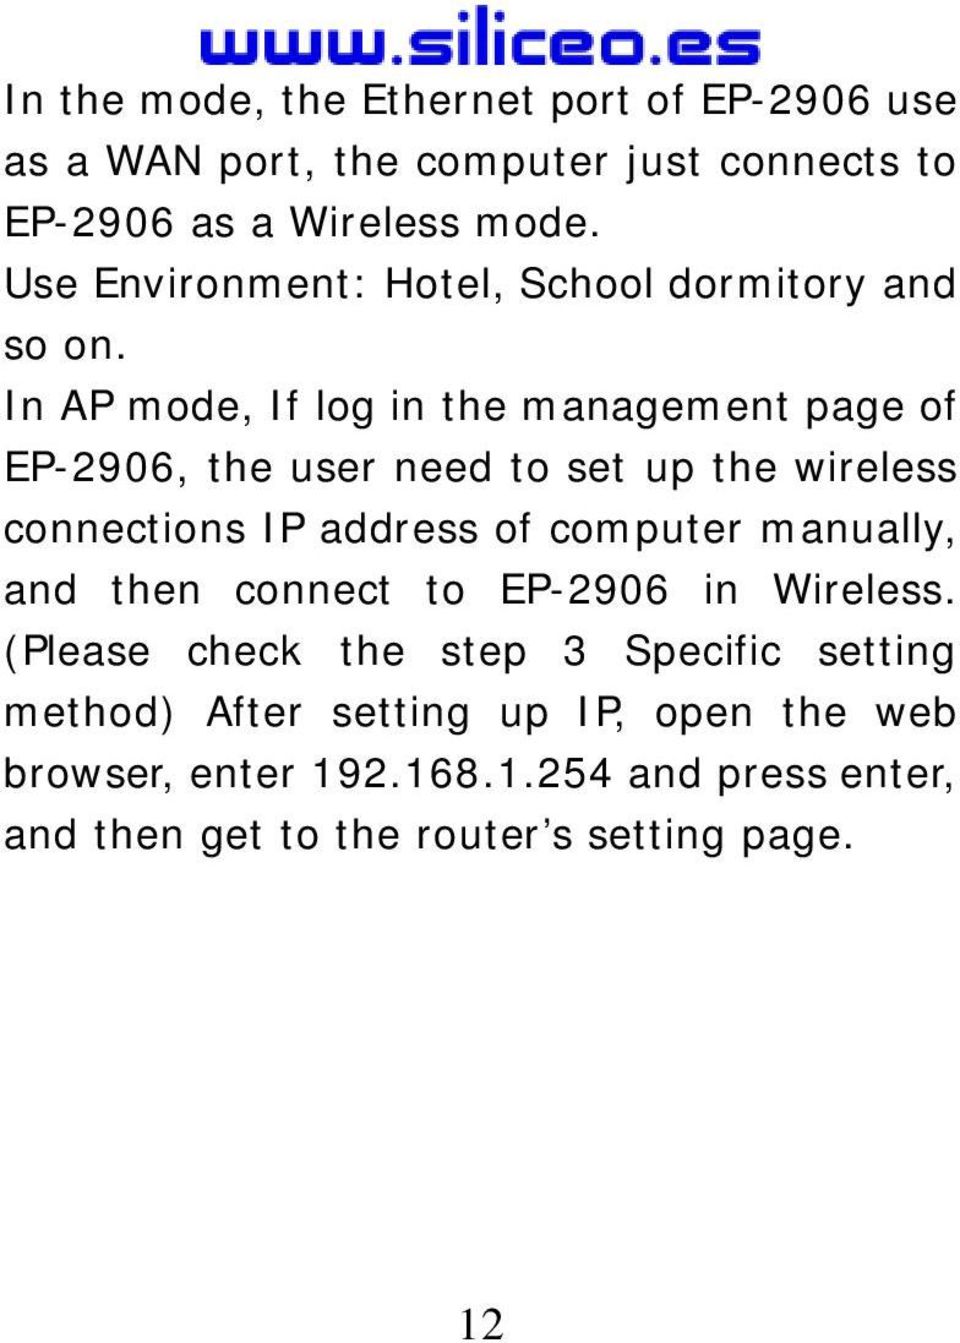 In AP mode, If log in the management page of EP-2906, the user need to set up the wireless connections IP address of computer